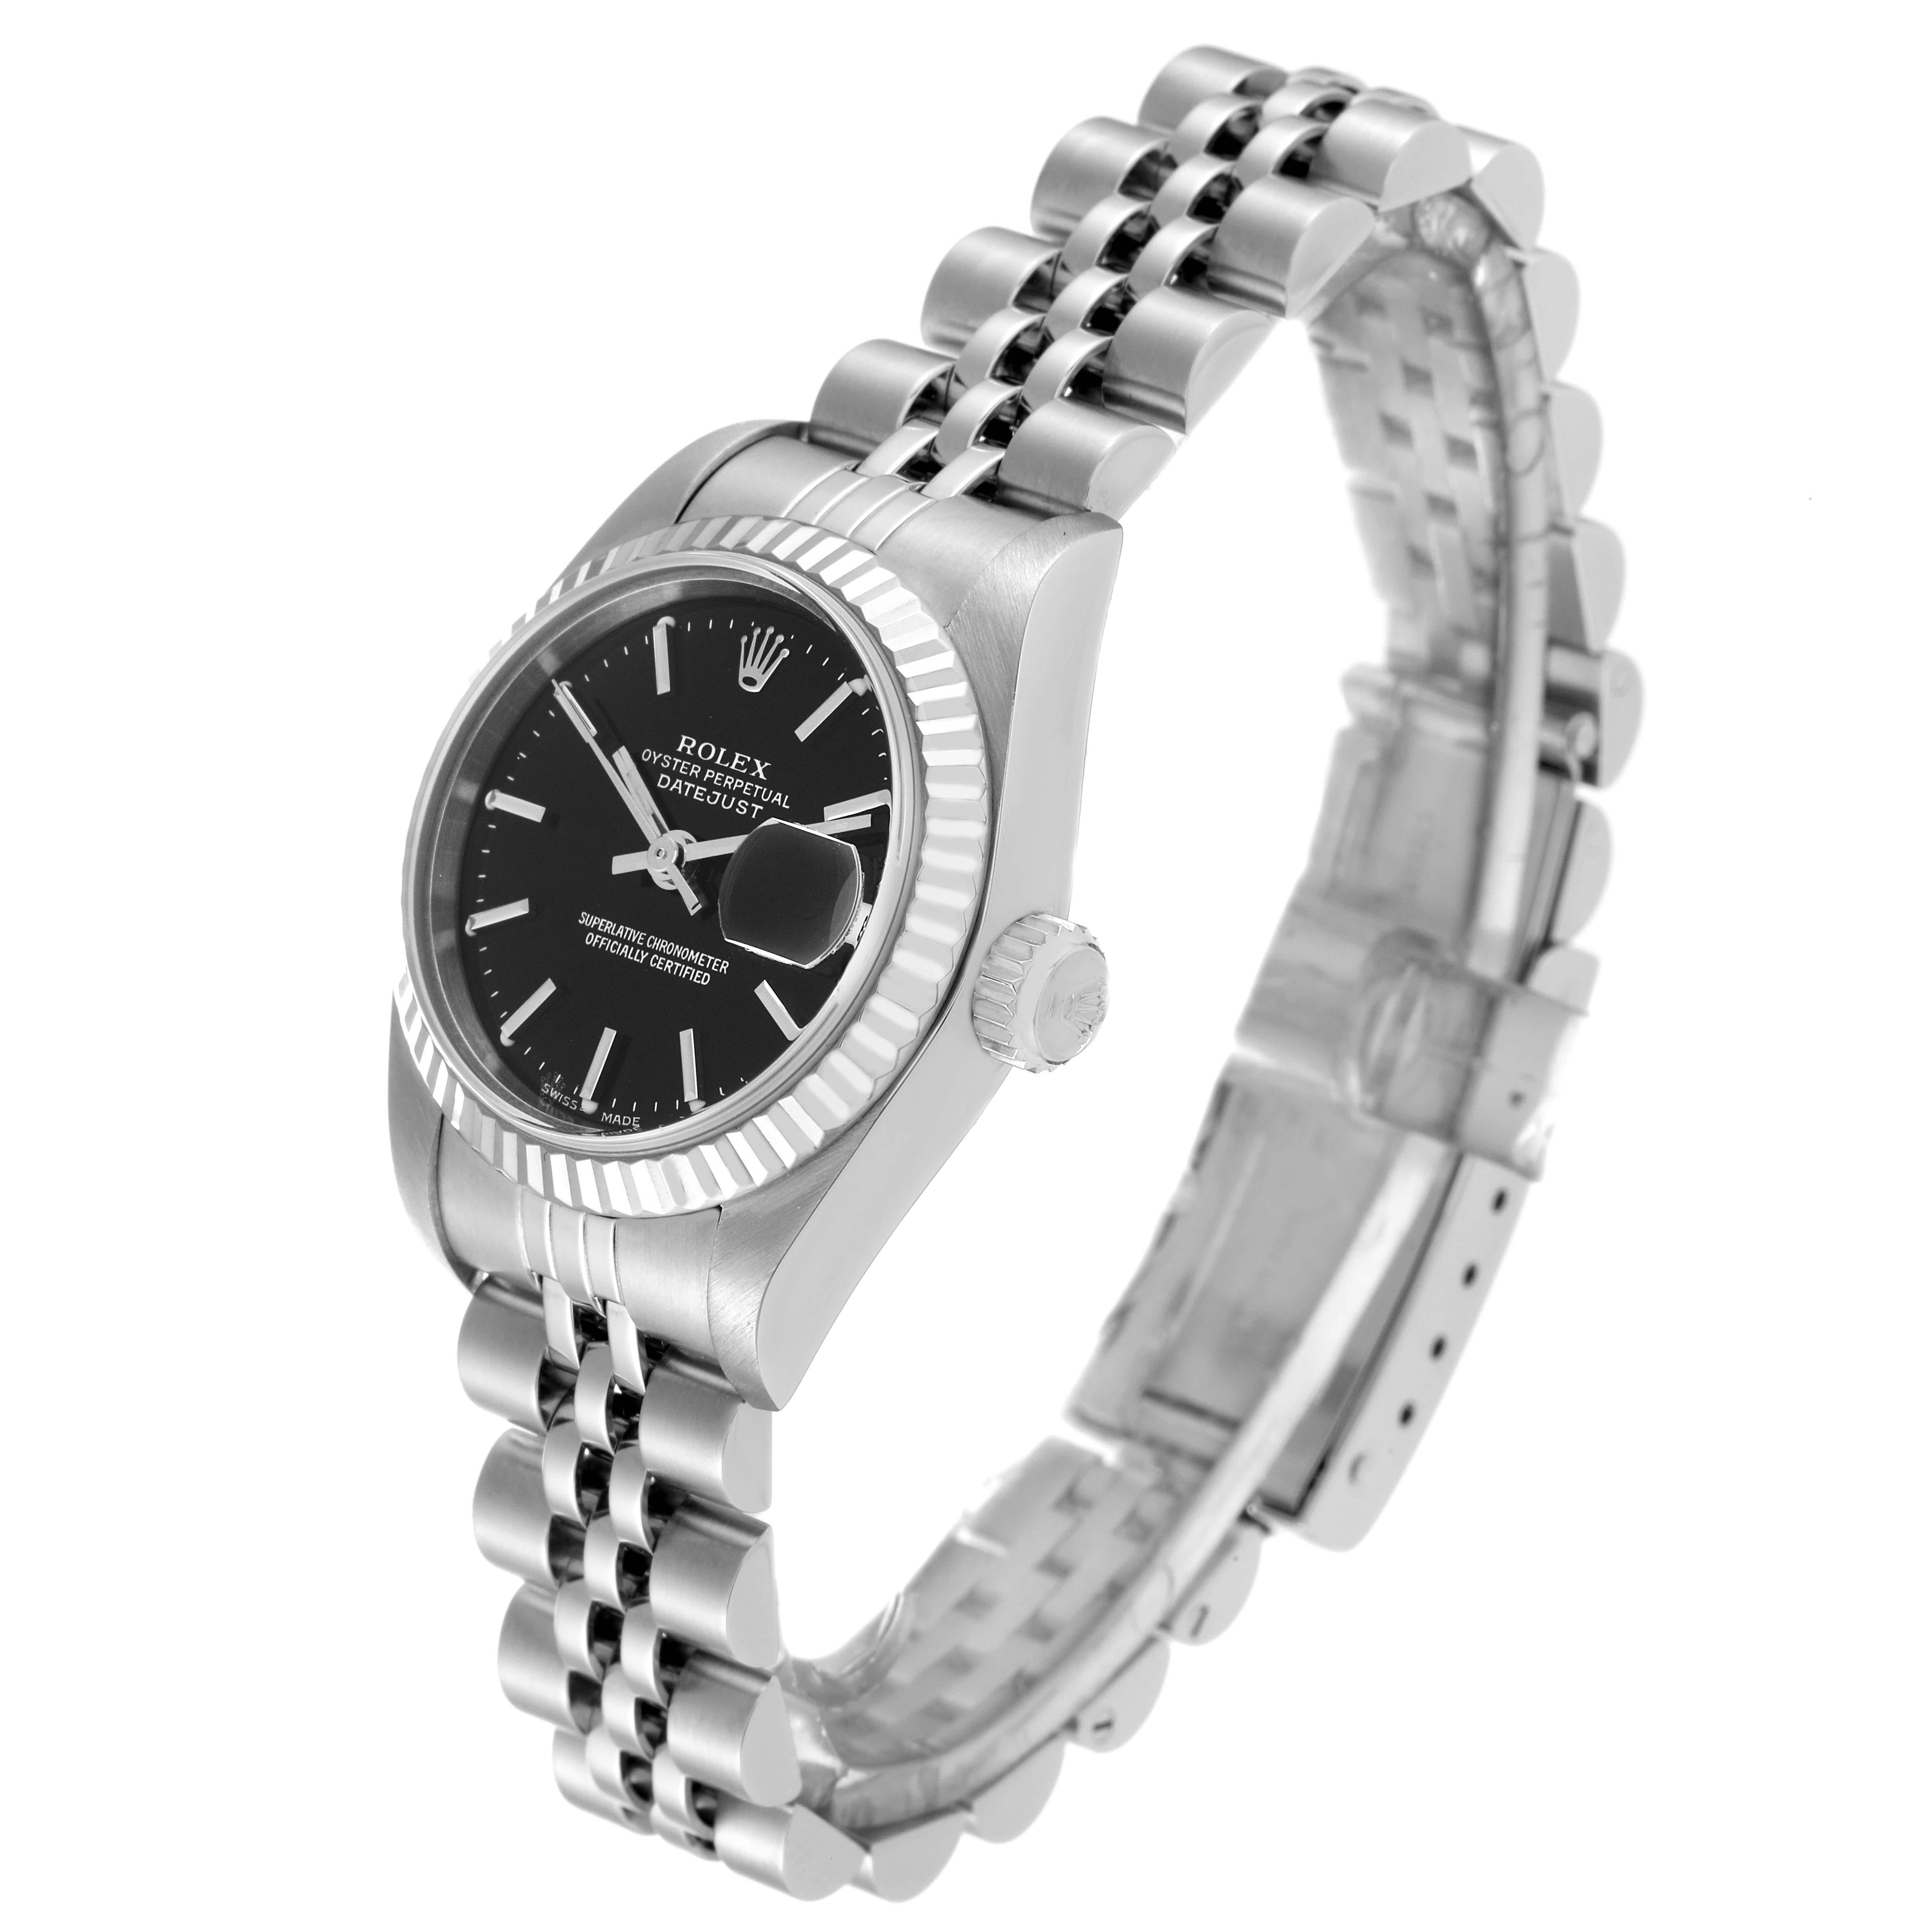 Rolex Datejust 26 Steel White Gold Black Dial Ladies Watch 79174 Box Papers 7